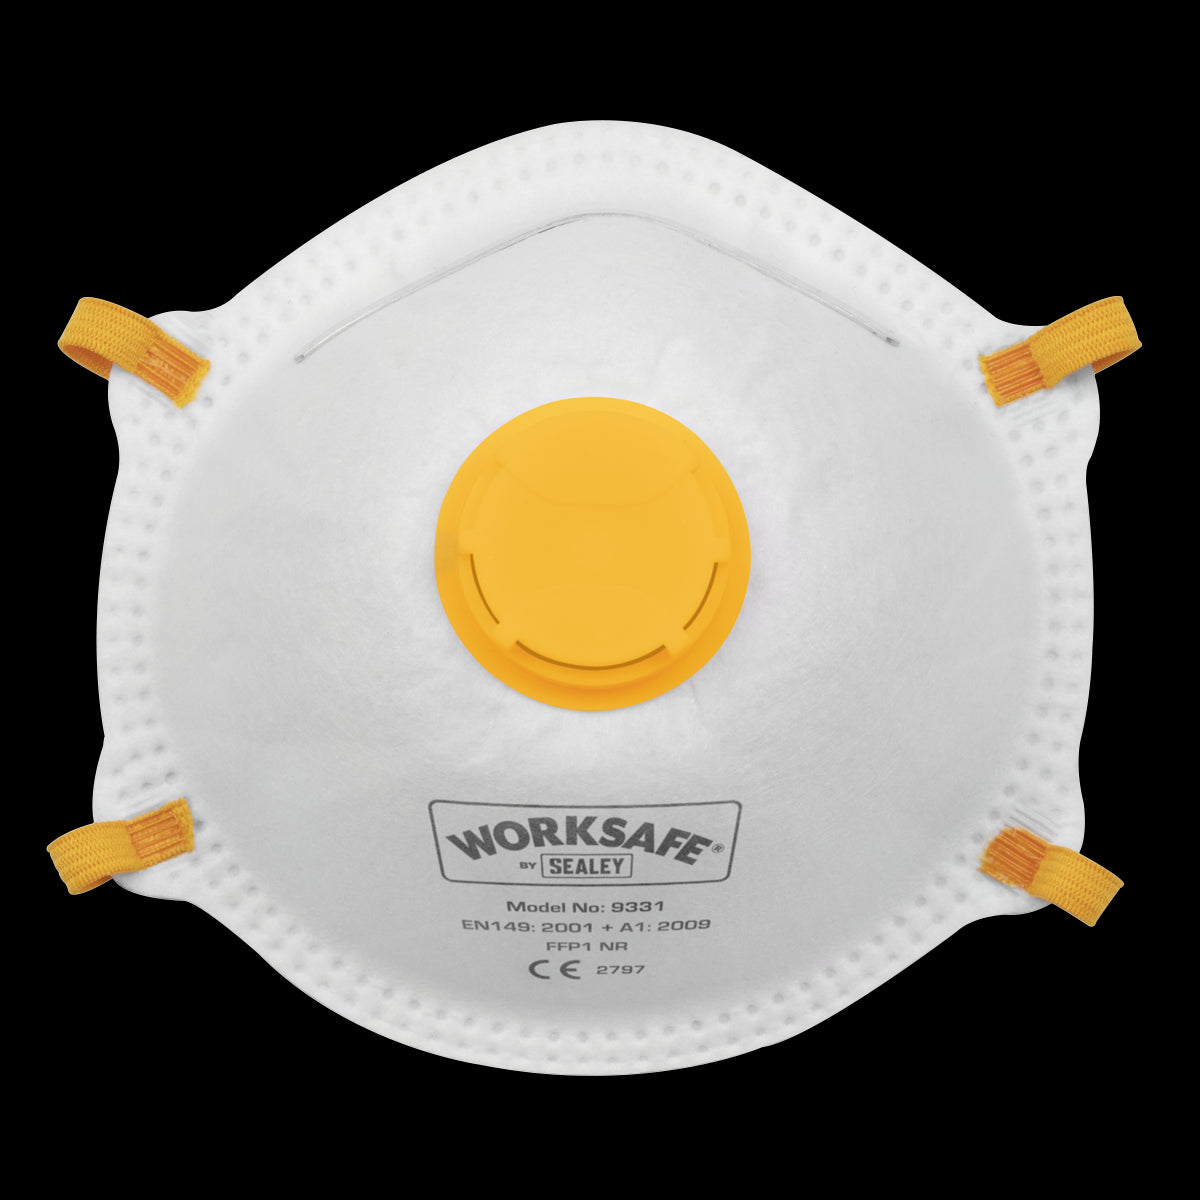 Worksafe by Sealey Cup Mask Valved FFP1 - Pack of 10